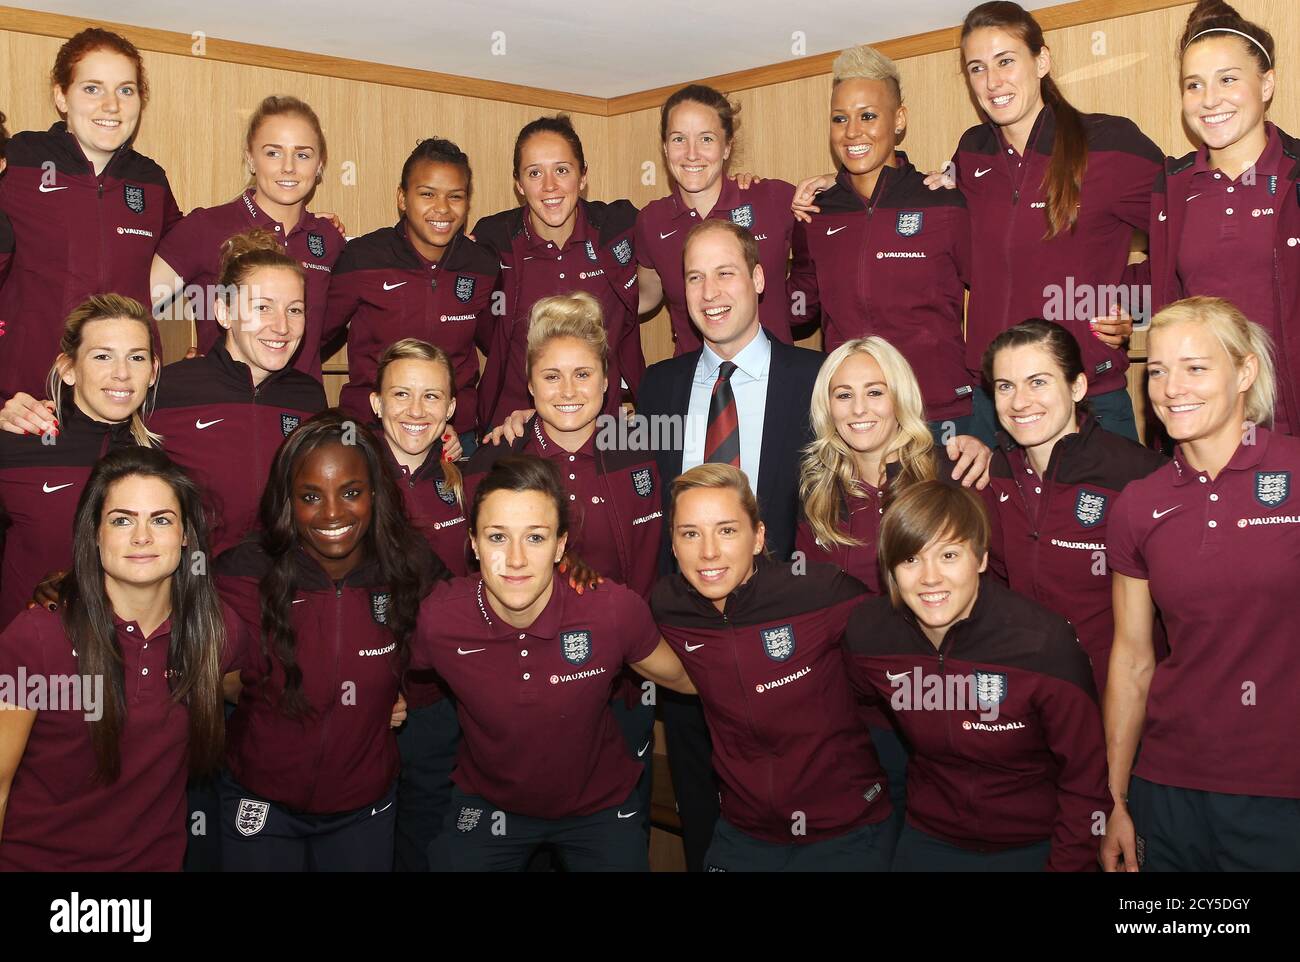 Britain's Prince William poses for a team photo with the England ladies soccer World Cup squad at St George's Park, Burton, Britain, May 20, 2015.  REUTERS/Bradley Ormesher/Pool Stock Photo